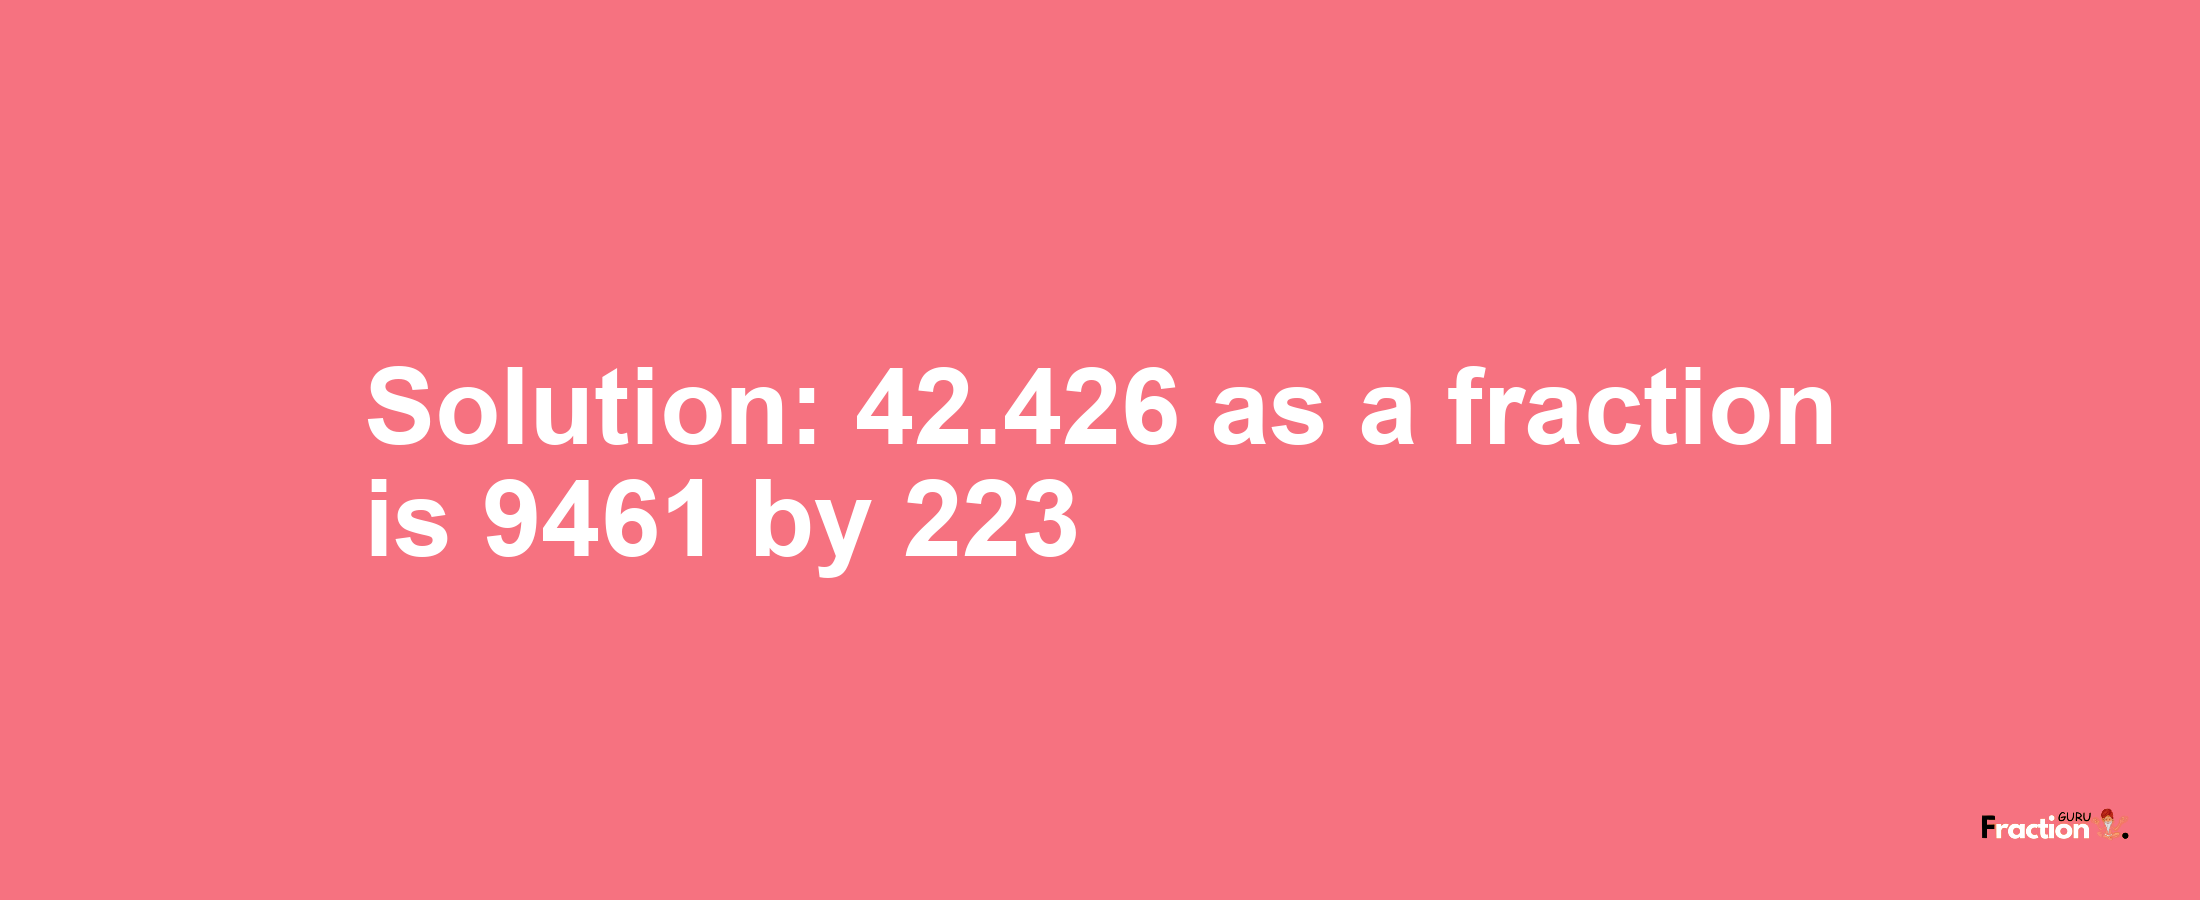 Solution:42.426 as a fraction is 9461/223